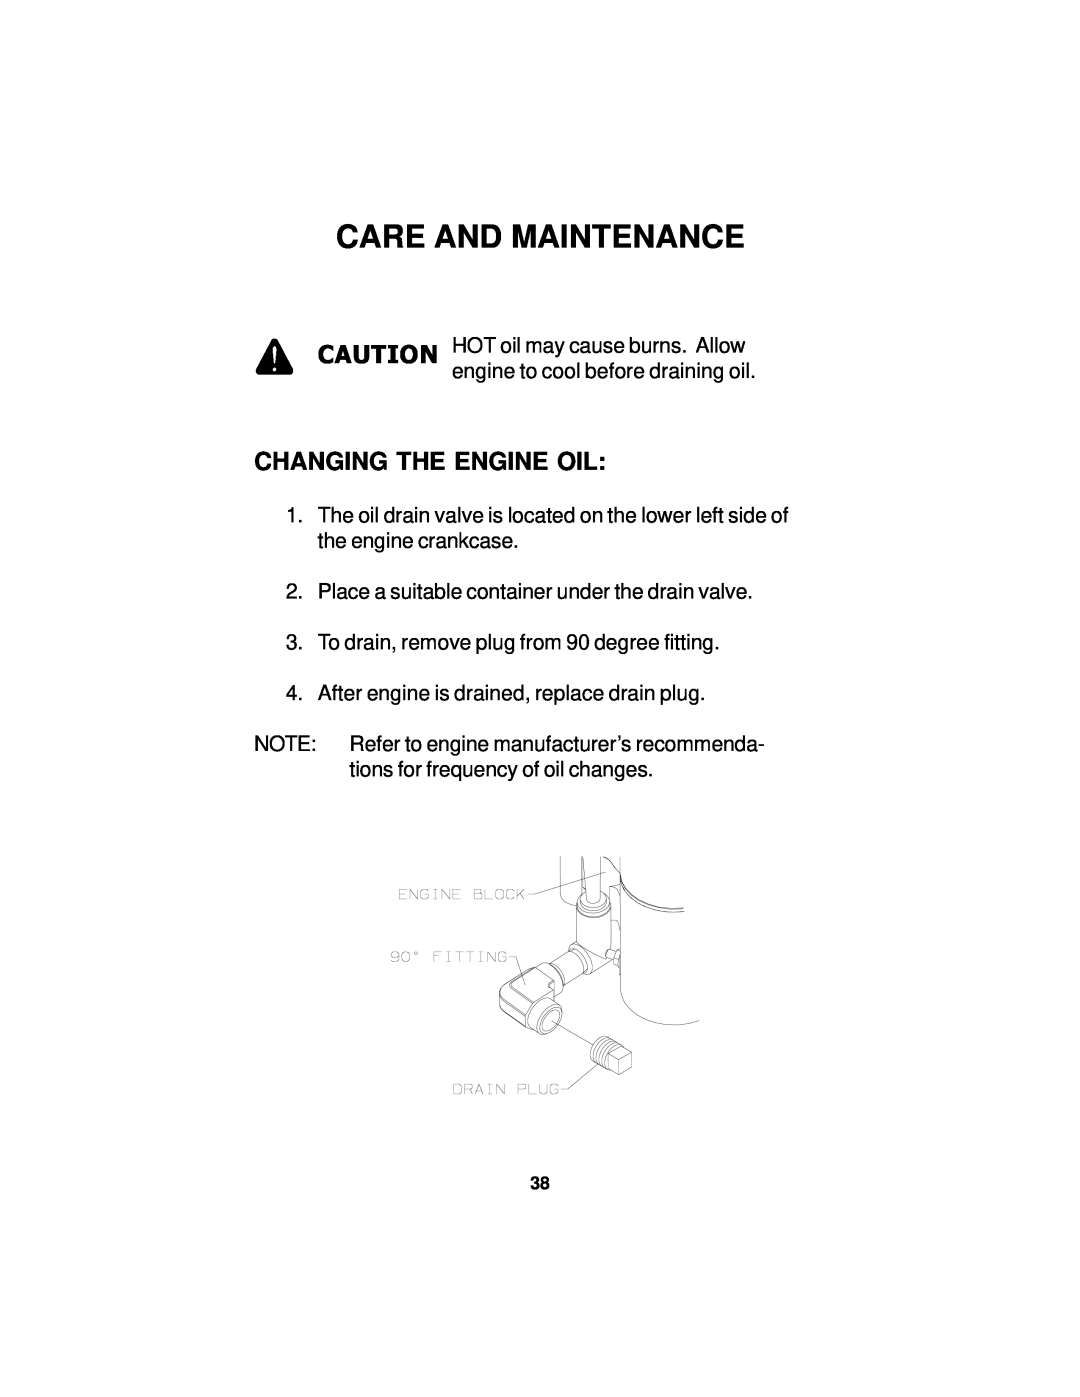 Dixon 14295-0804 manual Changing The Engine Oil, Care And Maintenance 